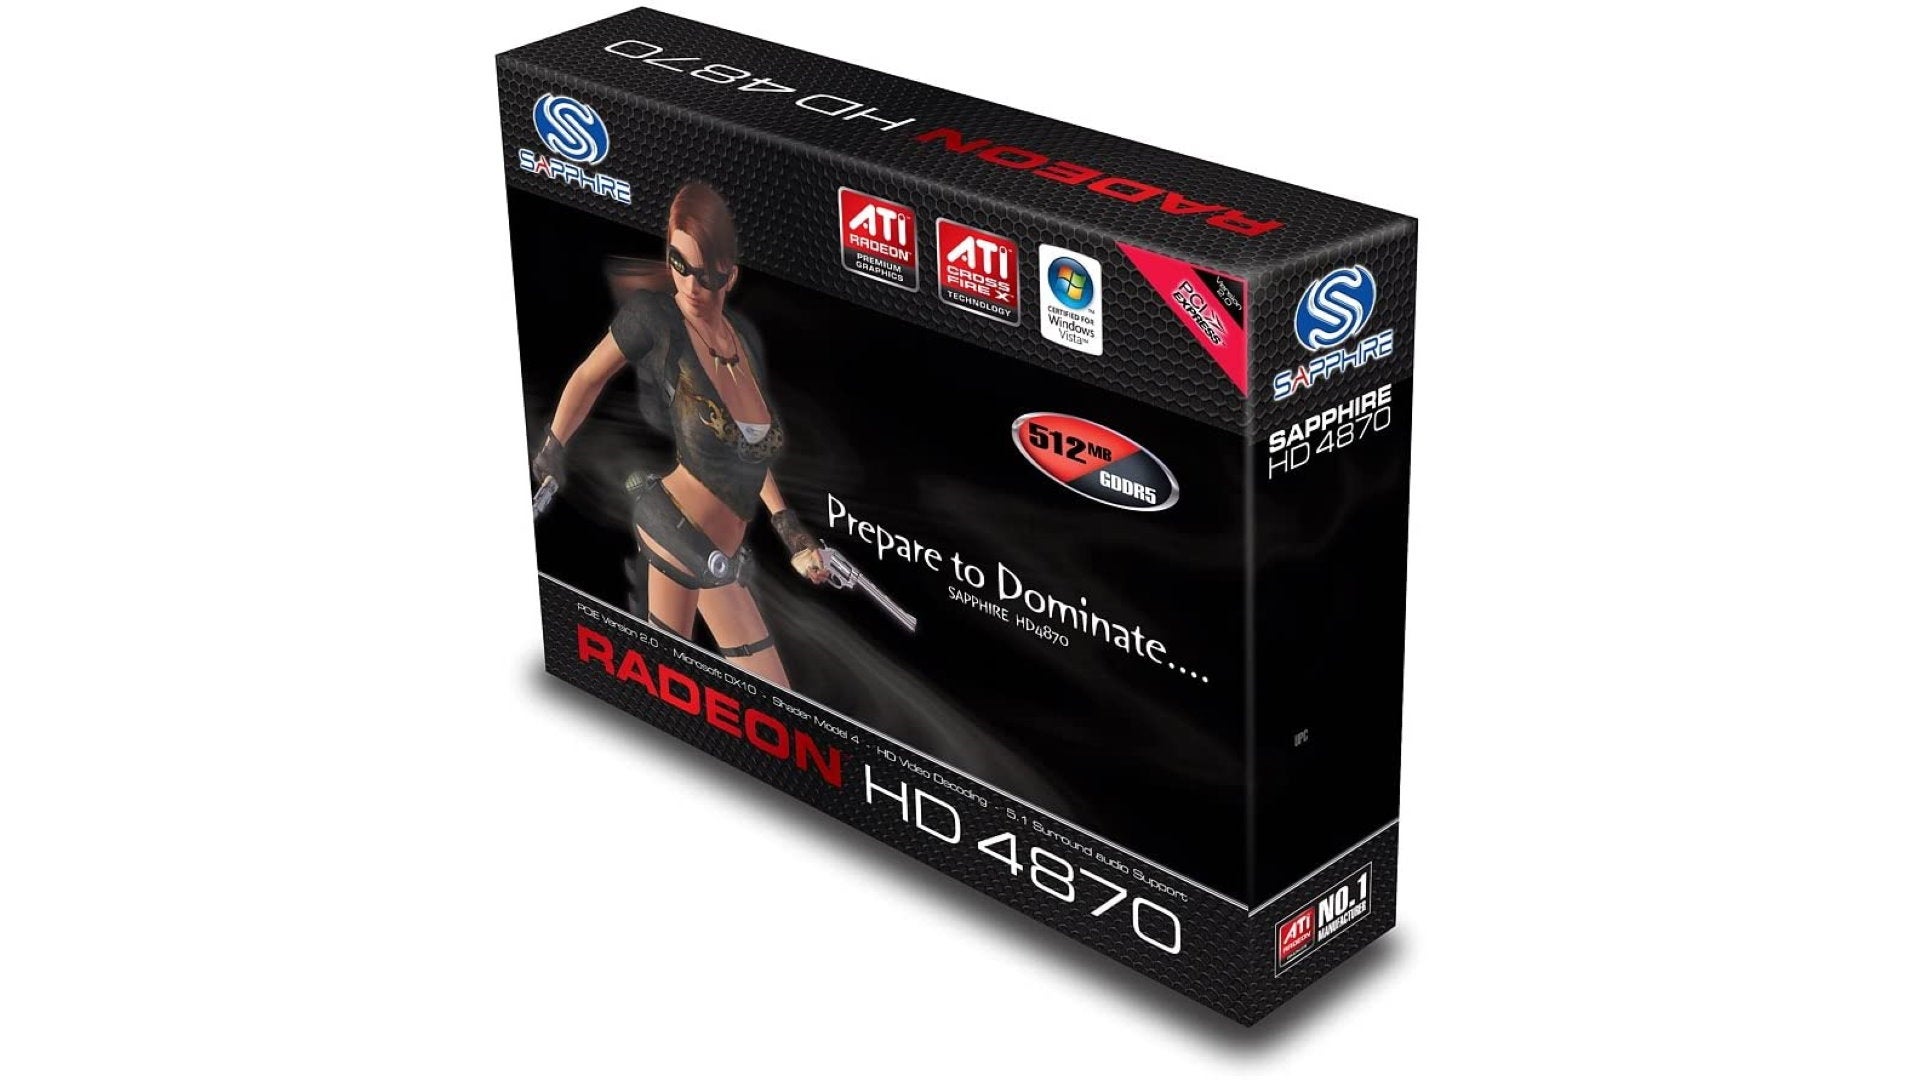 A graphics card box for Sapphire's Radeon HD 4870 depicting a woman who looks suspiciously like Lara Croft holding a gun